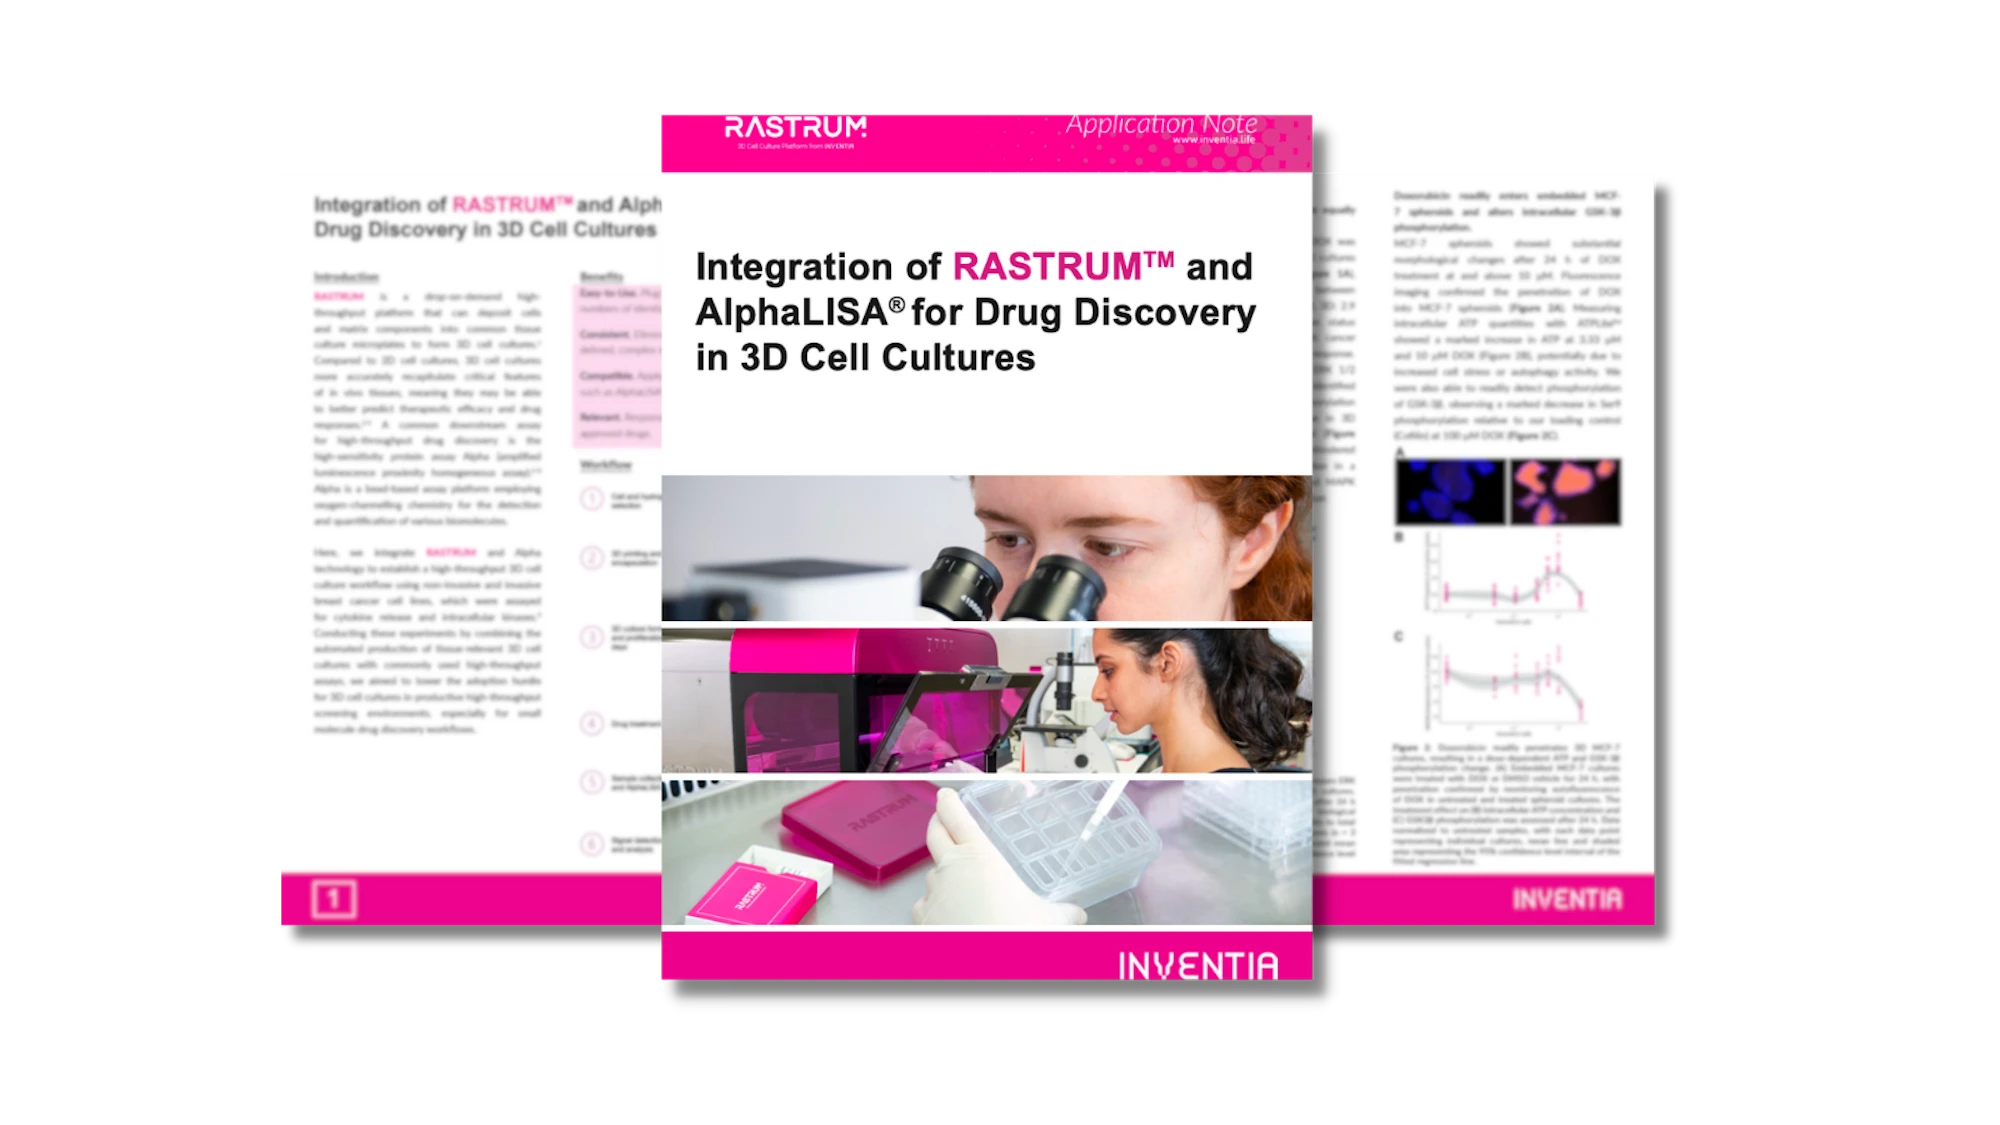 Integration of RASTRUM™ and AlphaLISA® for drug discovery in 3D cell cultures